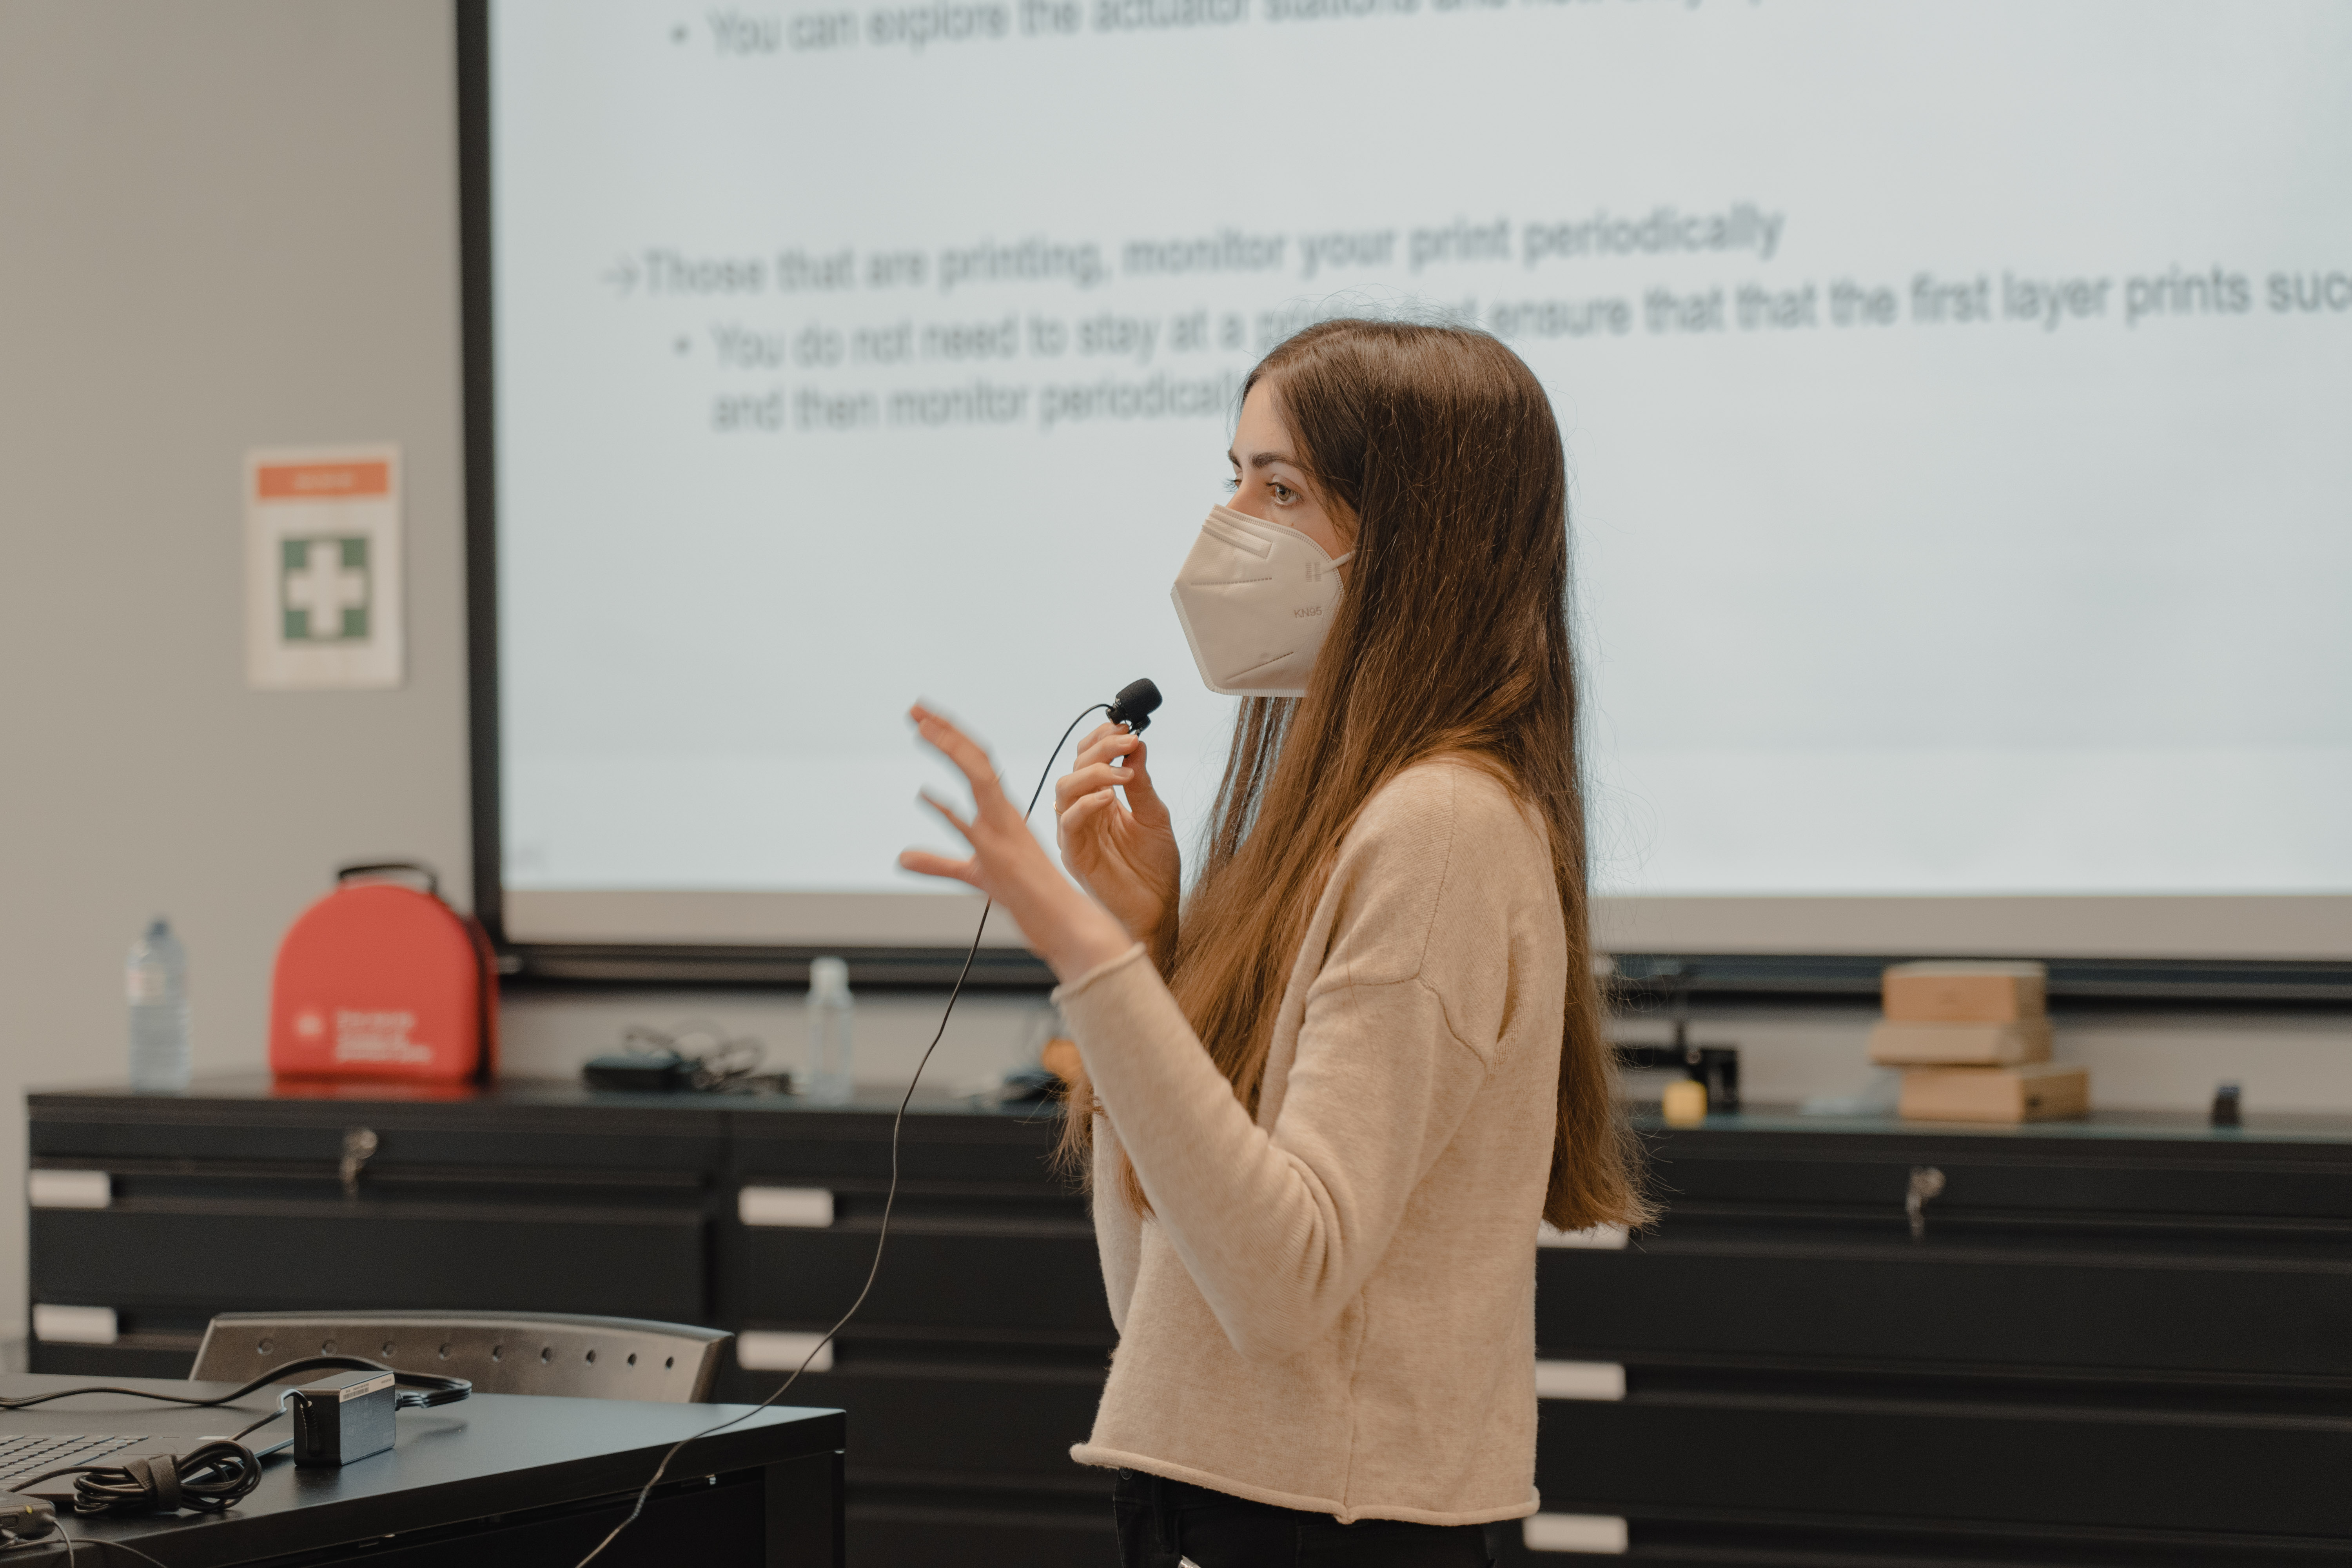 A masked woman speaks at the front of a classroom 